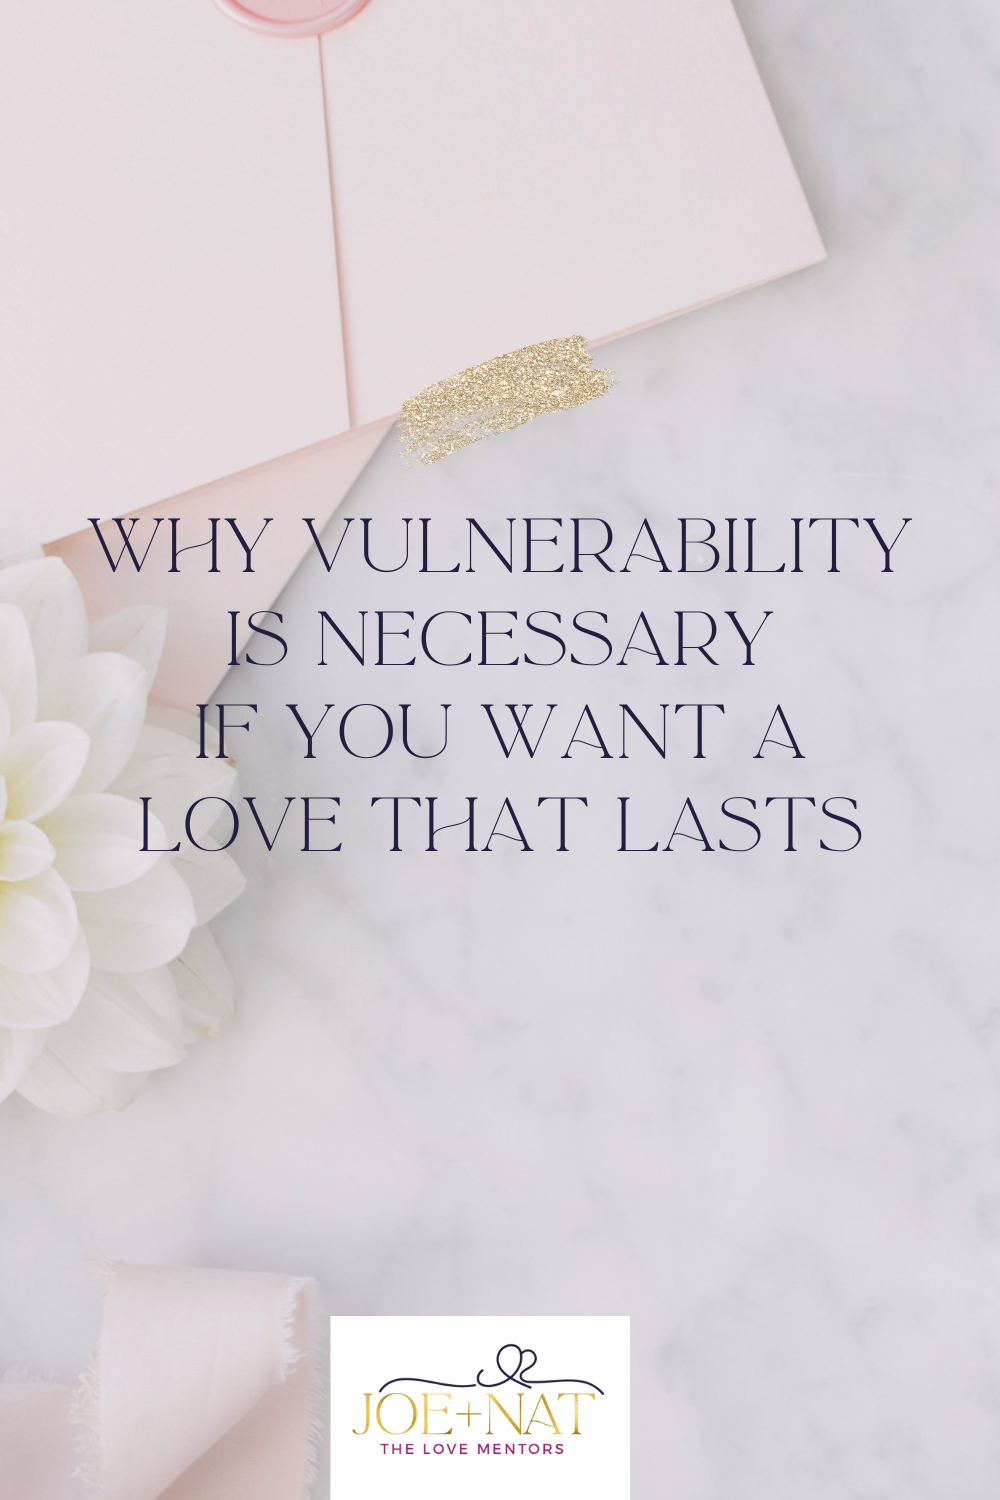 Featured image for “Why Vulnerability is Necessary If You Want A Love That Lasts”